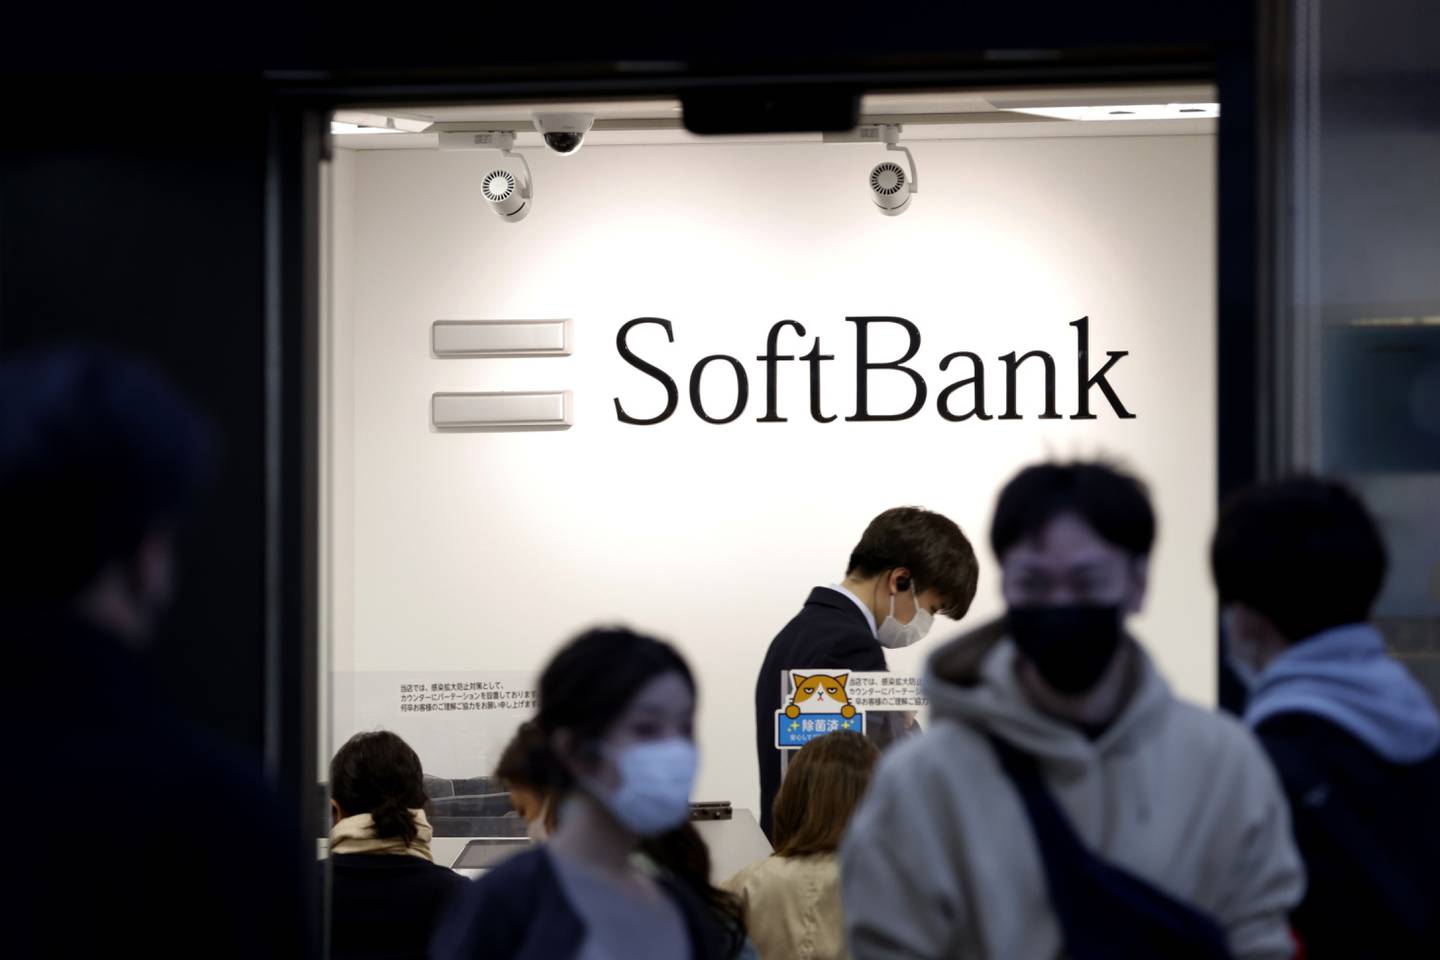 The SoftBank Corp. logo displayed inside a store in Tokyo, Japan, on Sunday, Nov. 7, 2021. SoftBank Group Corp. might see a return to investment losses when it reports earnings on Monday, as the impact of Chinas regulatory crackdown begins to hit valuations in its Vision Fund portfolio. Photographer: Kiyoshi Ota/Bloomberg